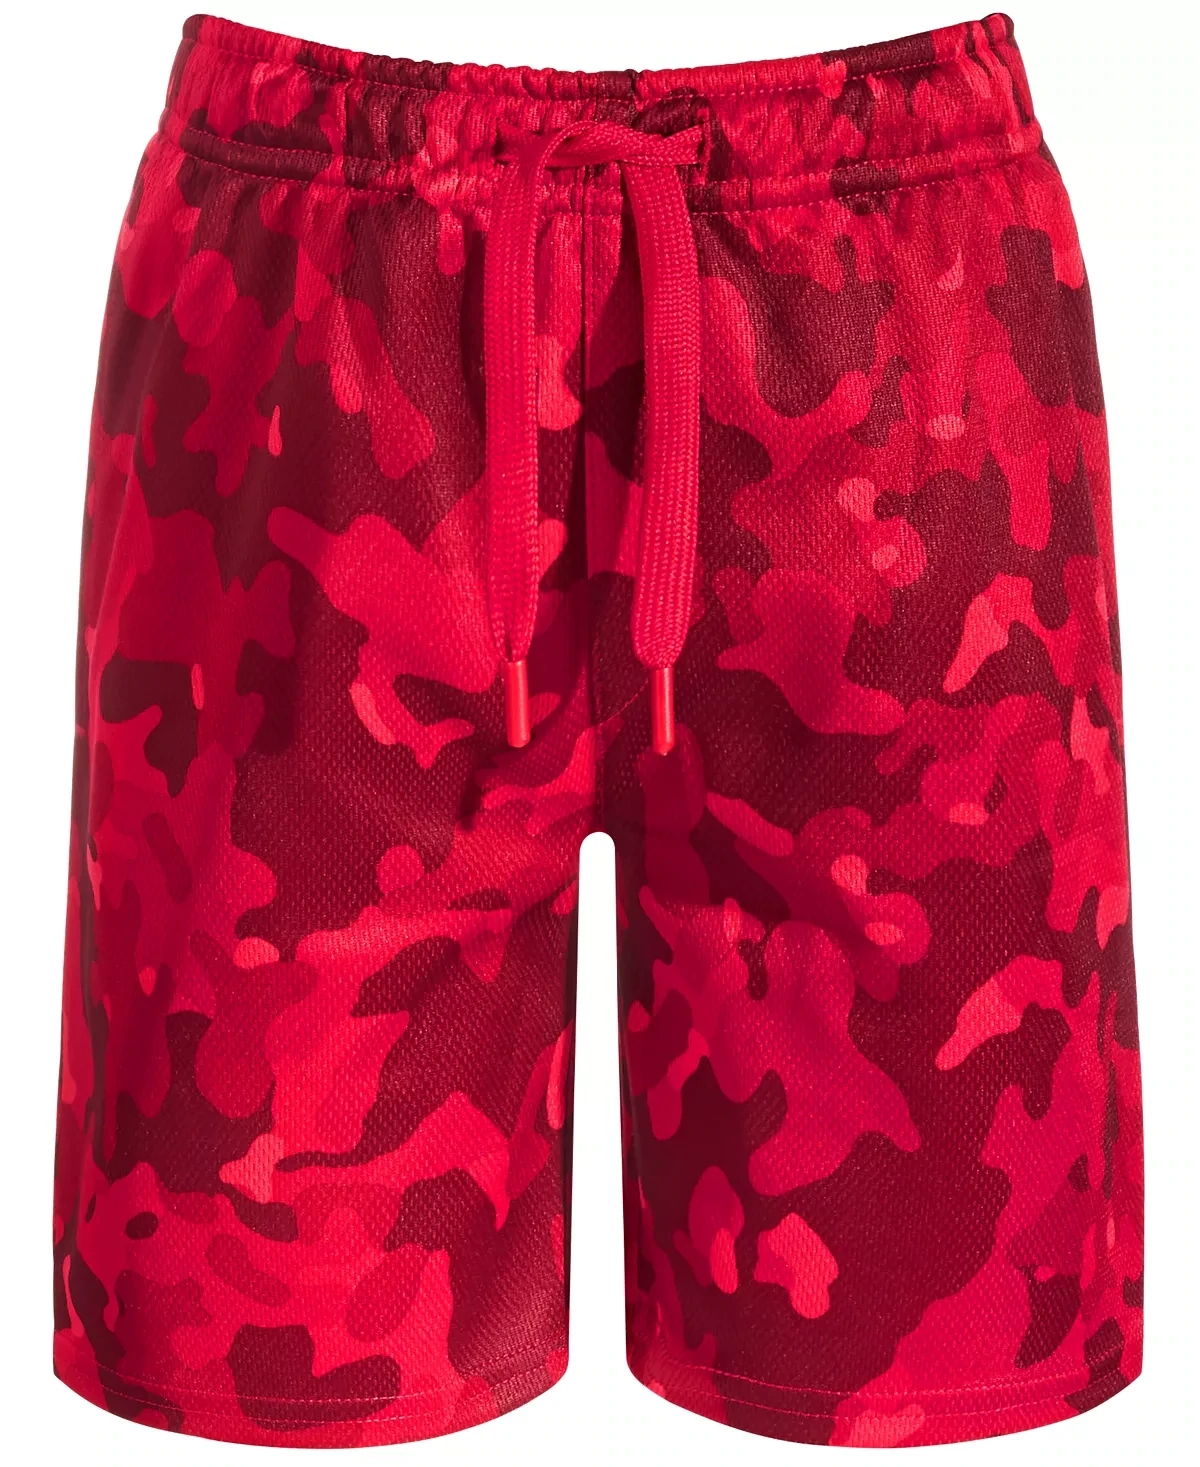 ID Ideology Toddler & Little Boys Printed Shorts, Licorice Red - Size 7